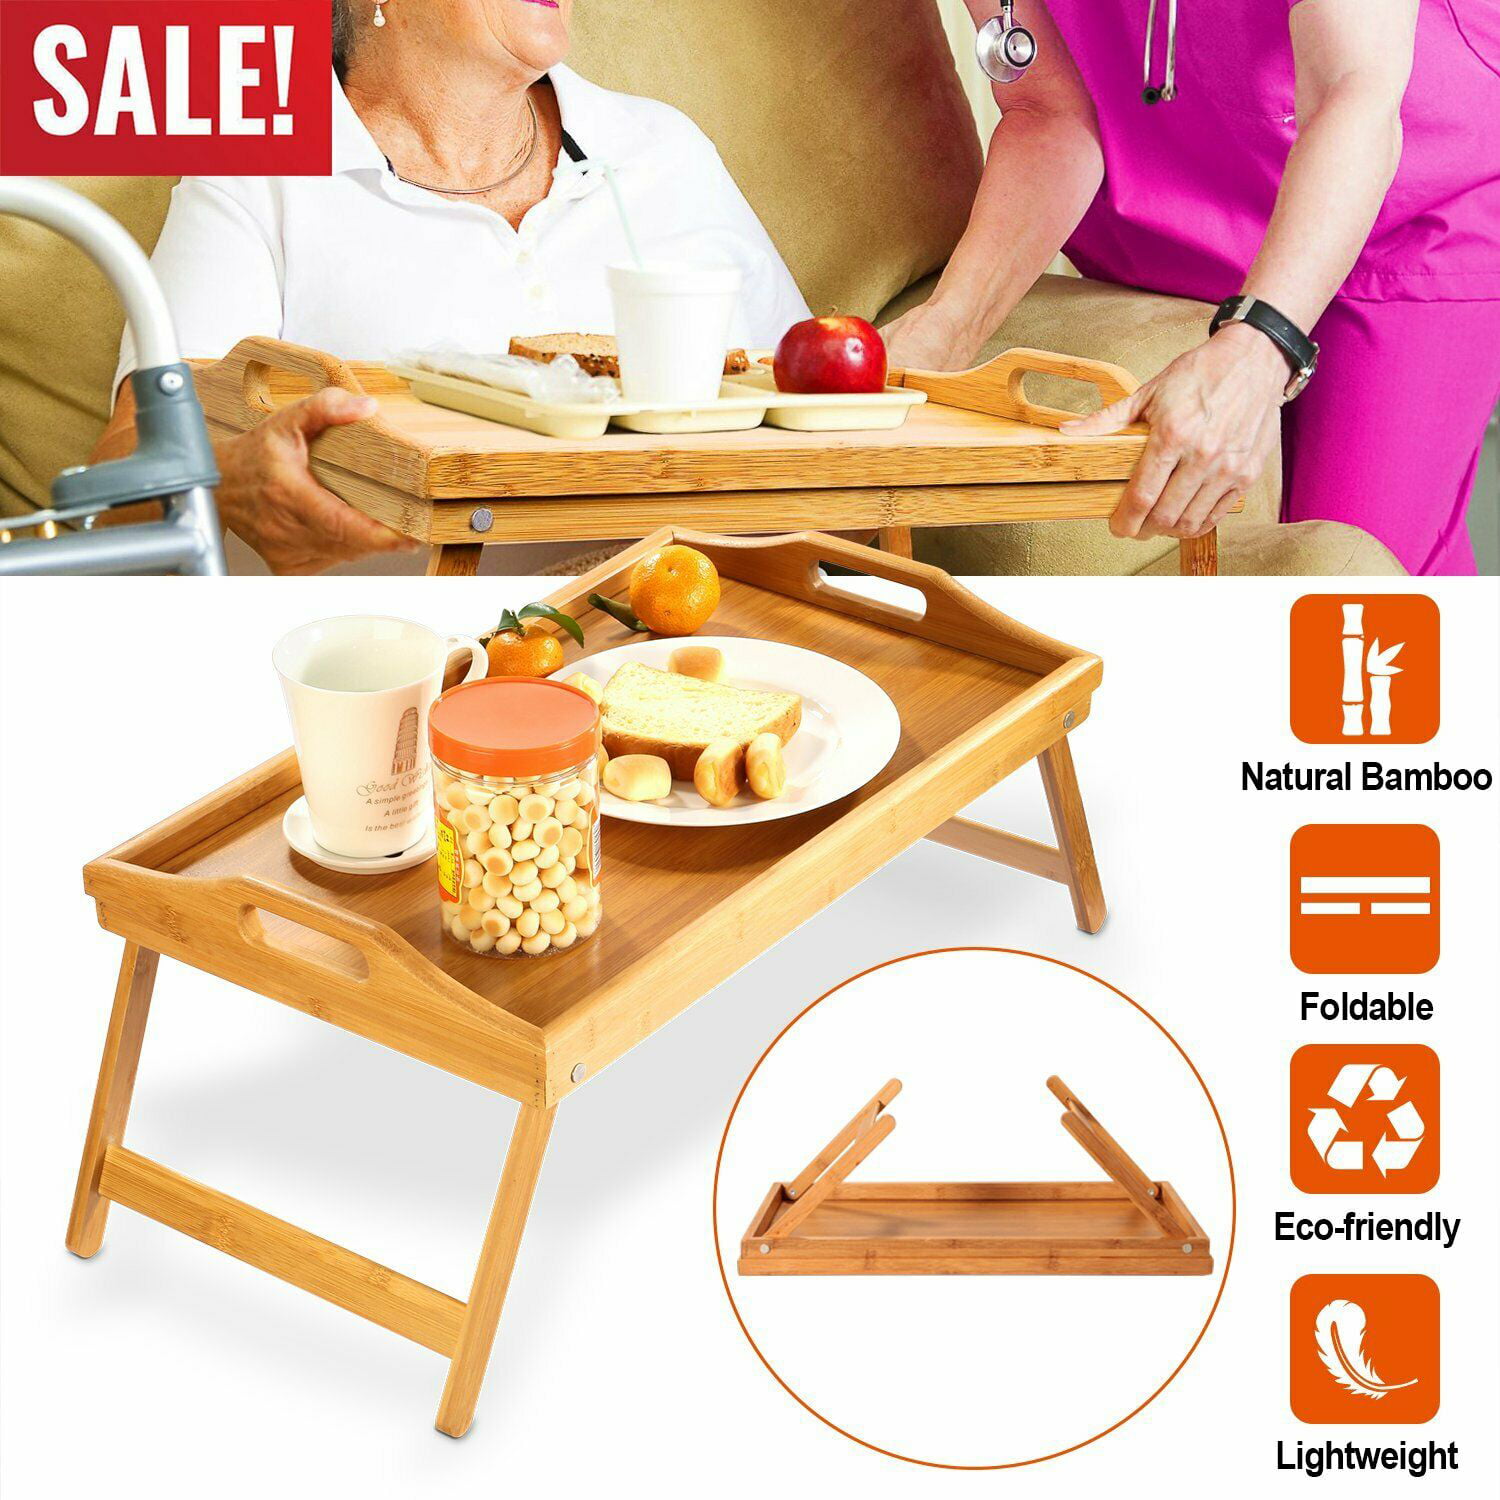 Bamboo Tea Table with Folding Legs and Handle Bed Tray Table Serving Breakfast in Bed or Use As a TV Table Laptop Computer Tray 